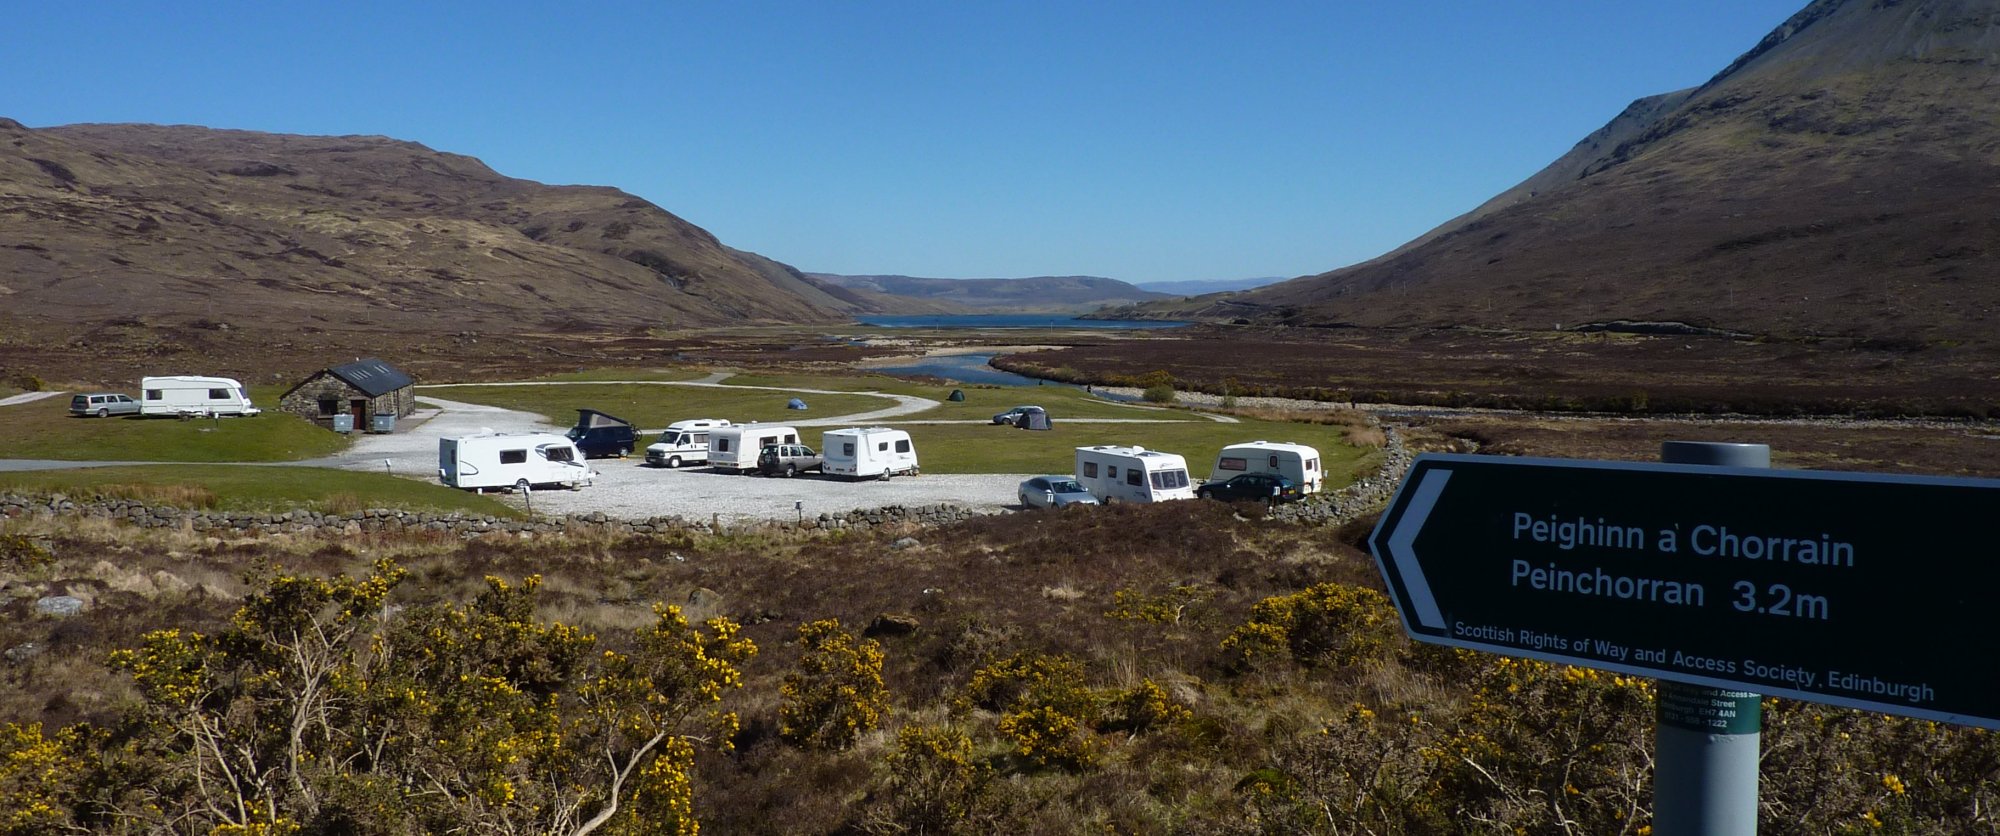 The campsite at Sligachan Hotel, a tad exposed for my liking